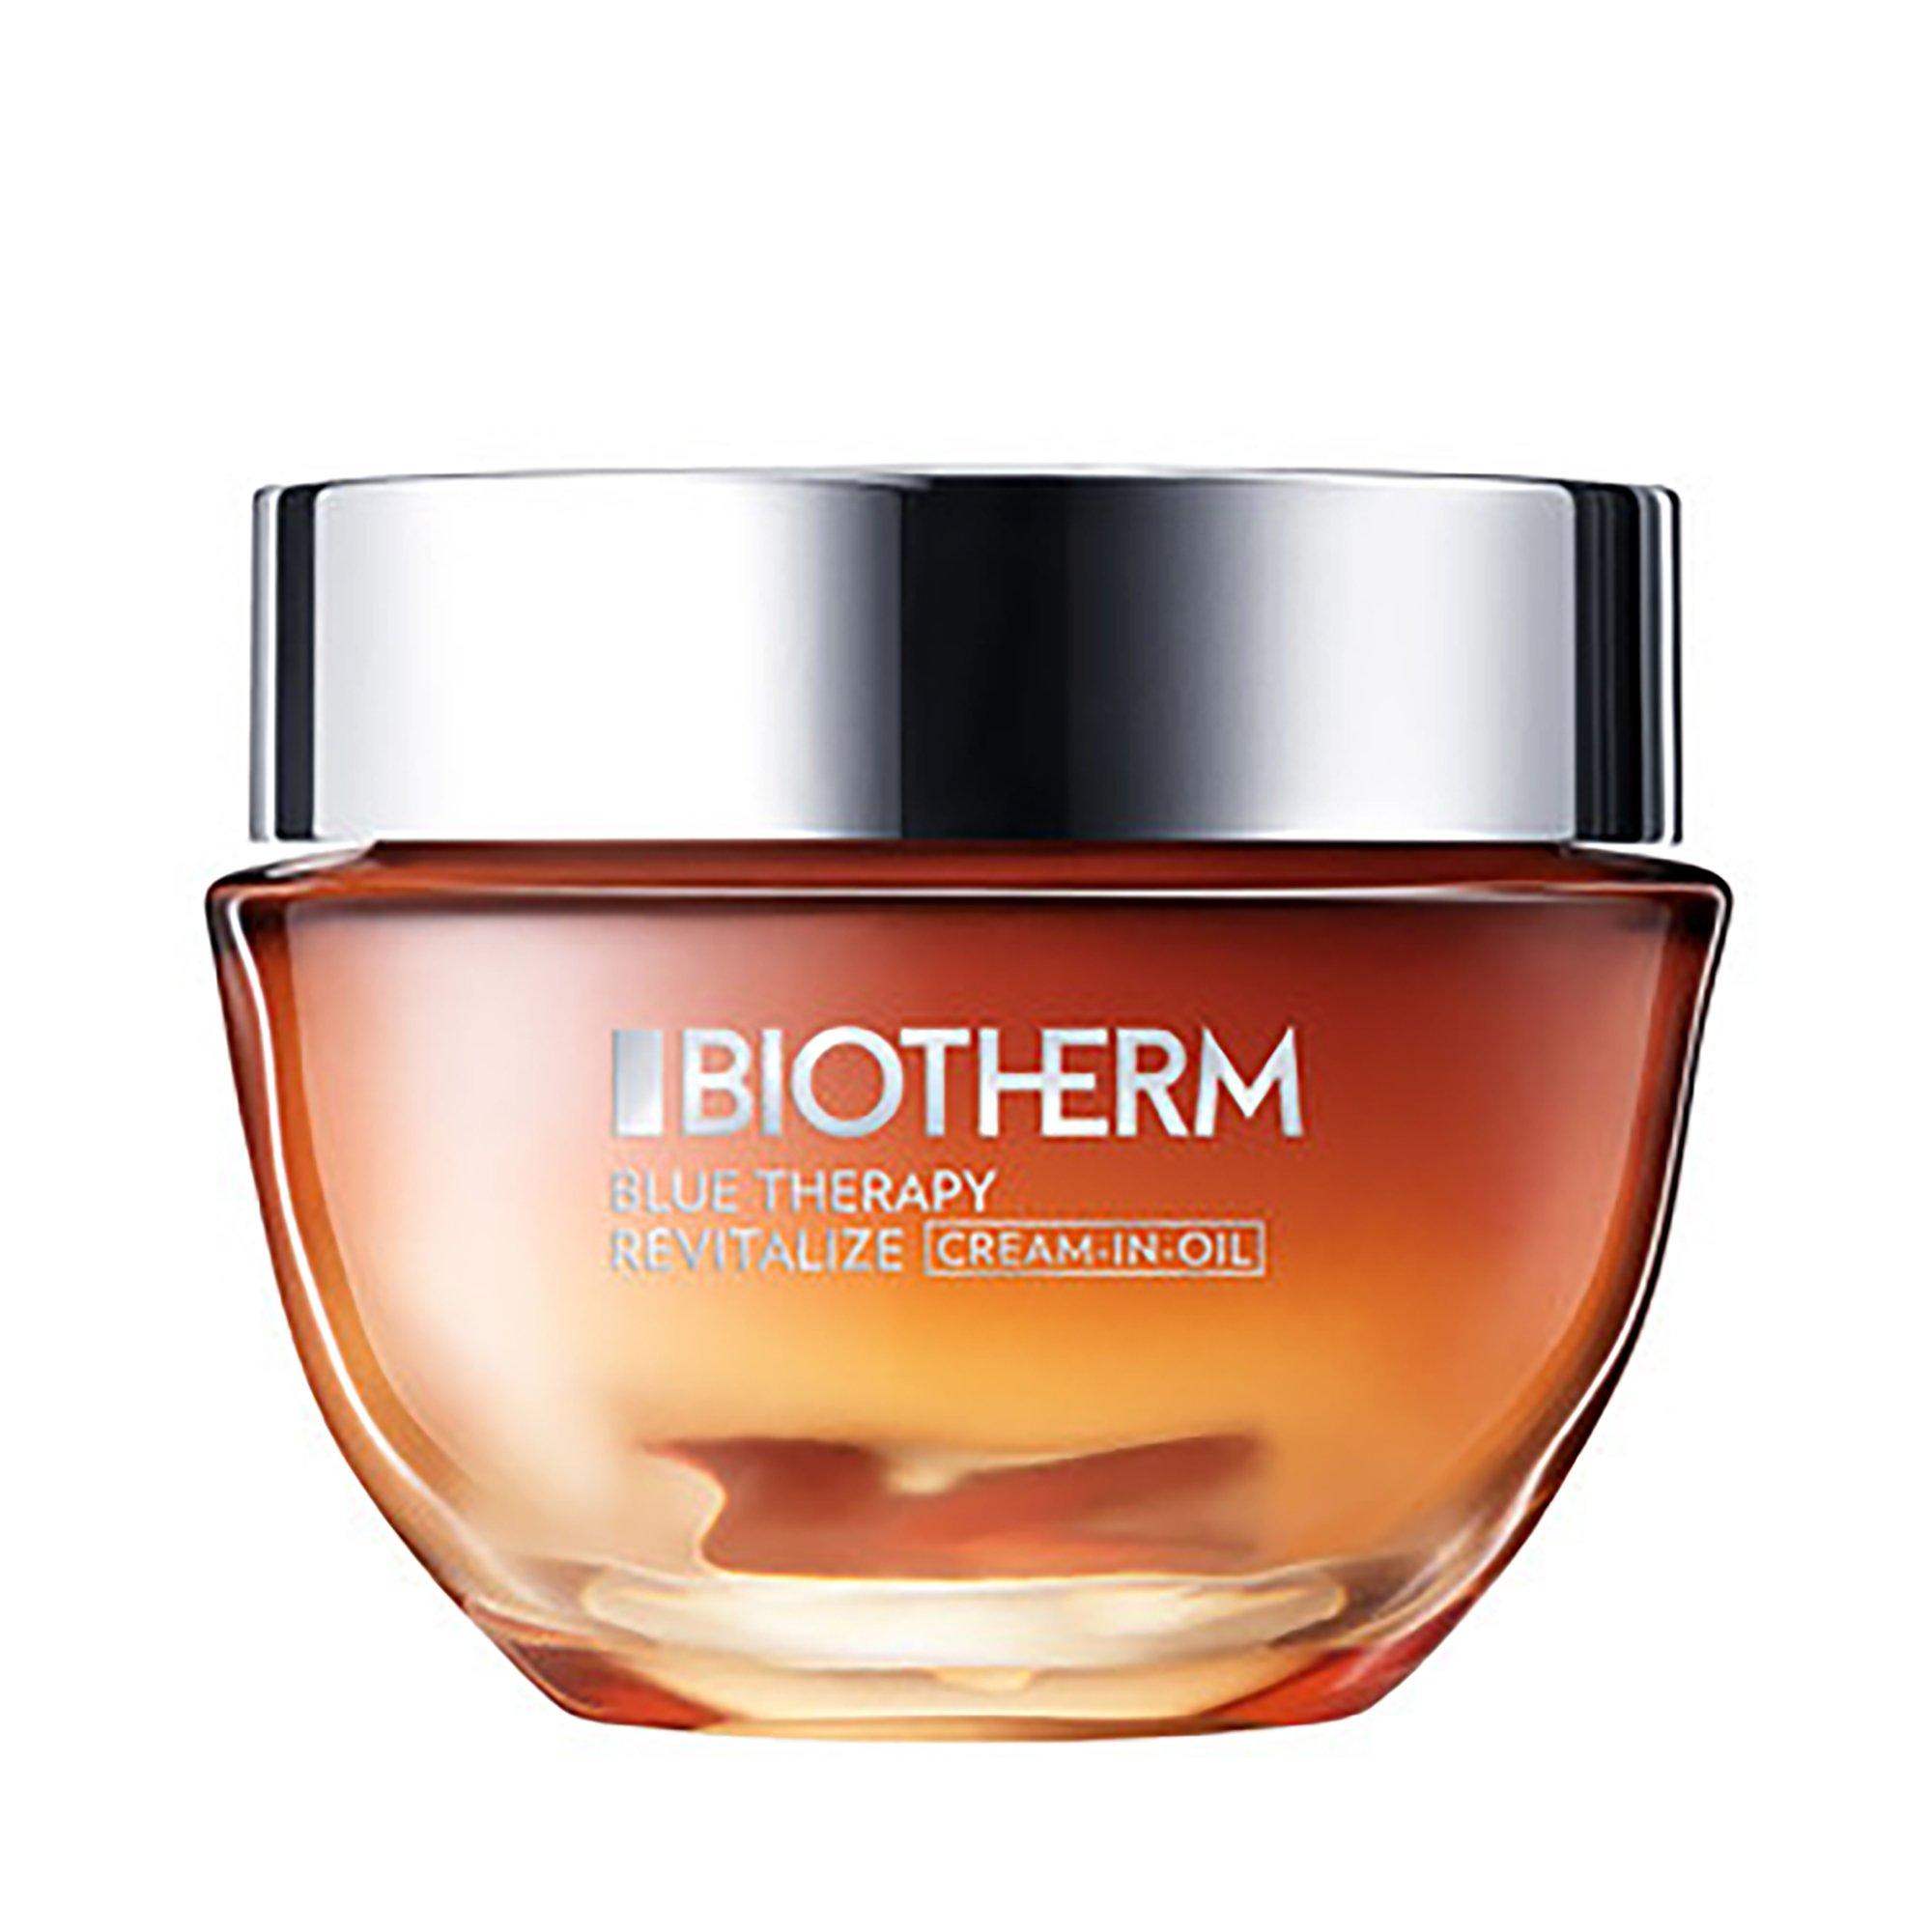 Image of BIOTHERM Blue Therapy Revitalize Cream-In-Oil